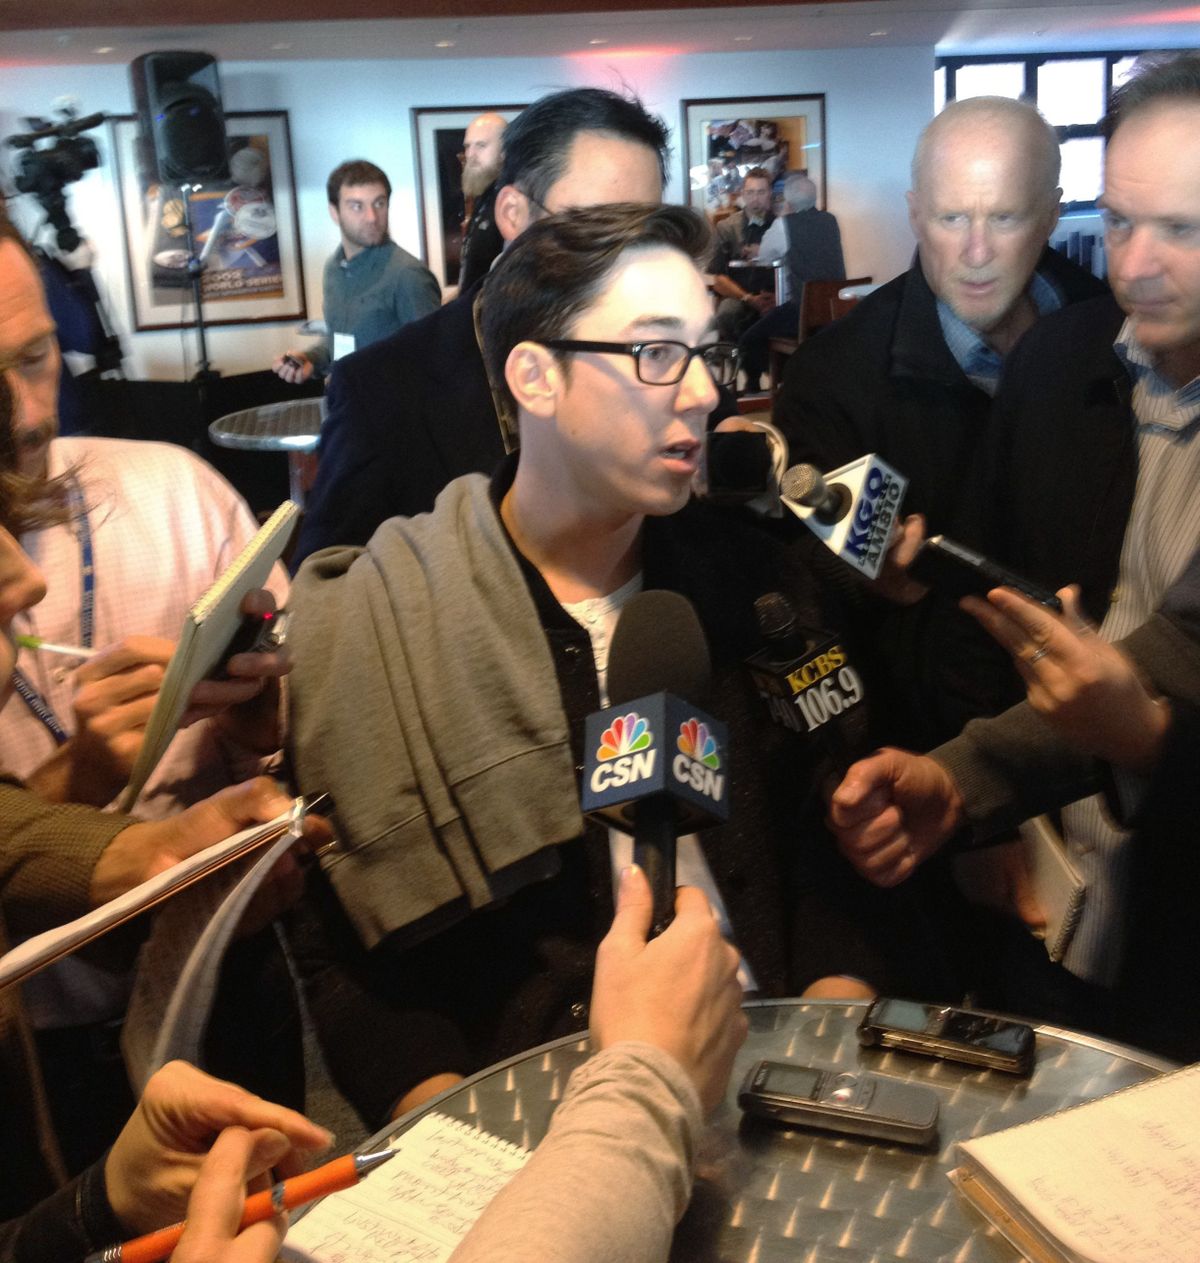 Giants pitcher Tim Lincecum says his new look, including short hair and faux eyeglasses, is more than skin deep. (Associated Press)